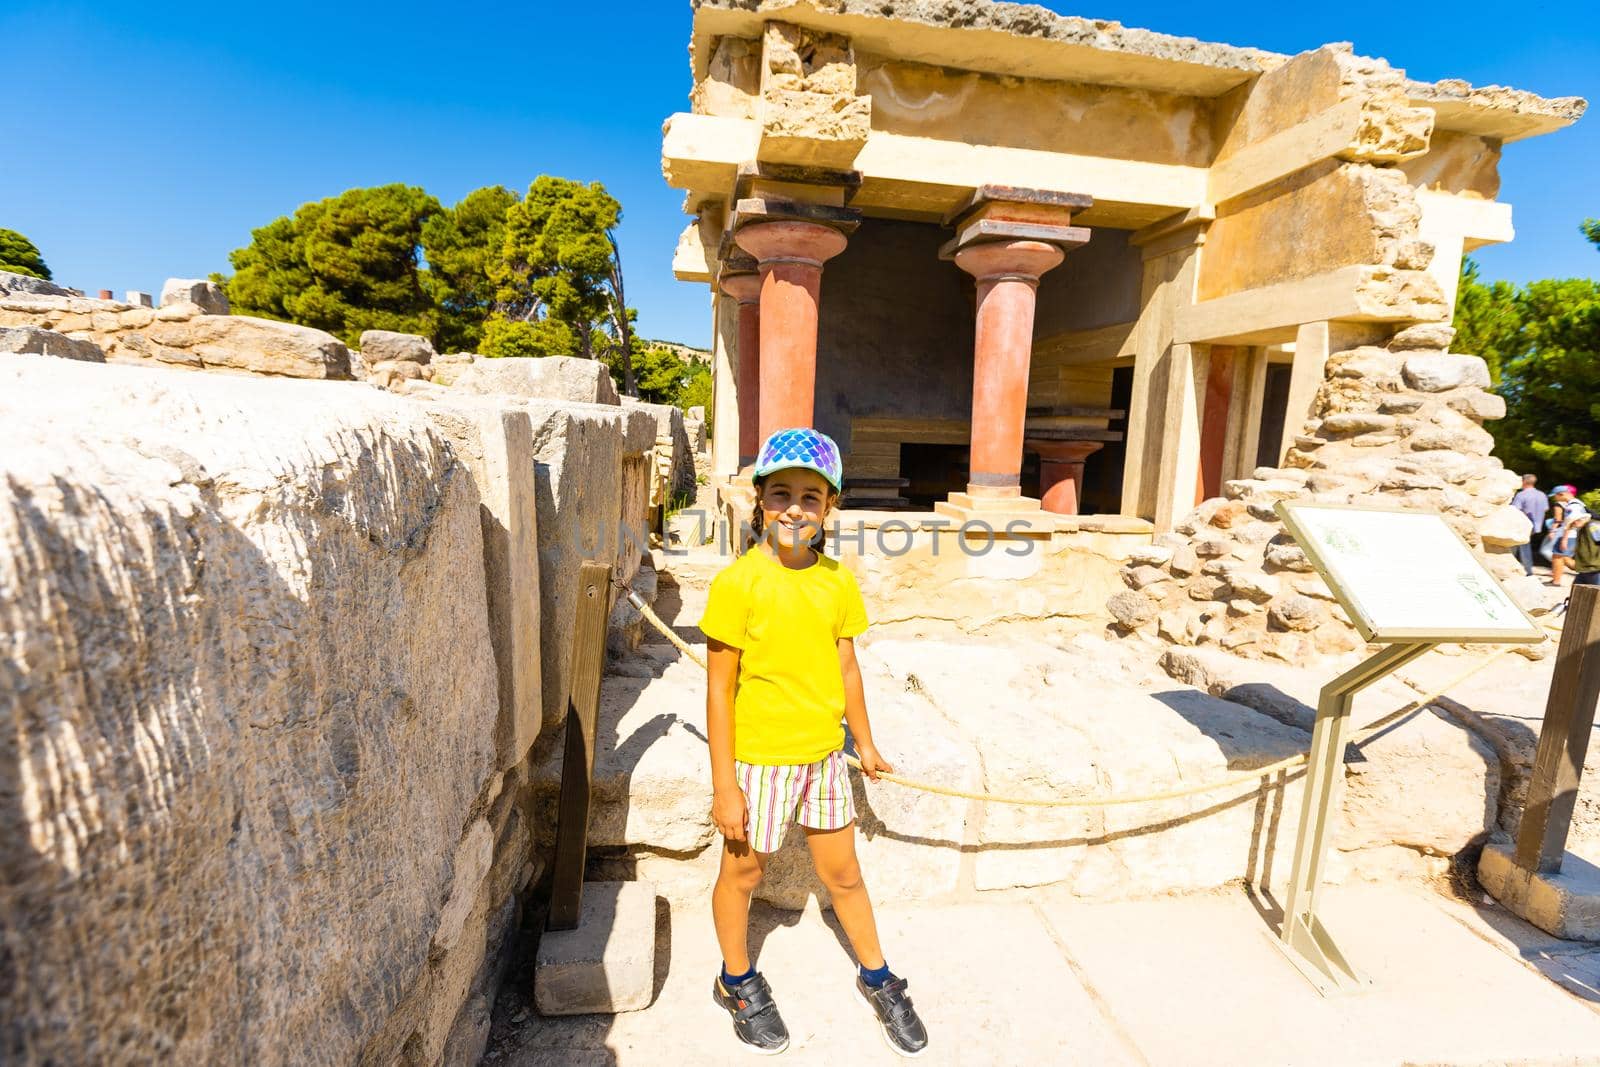 A little girl stops to take a photo of artwork on the walls of the Minoan palace at Knossos. Crete, Greece by Andelov13